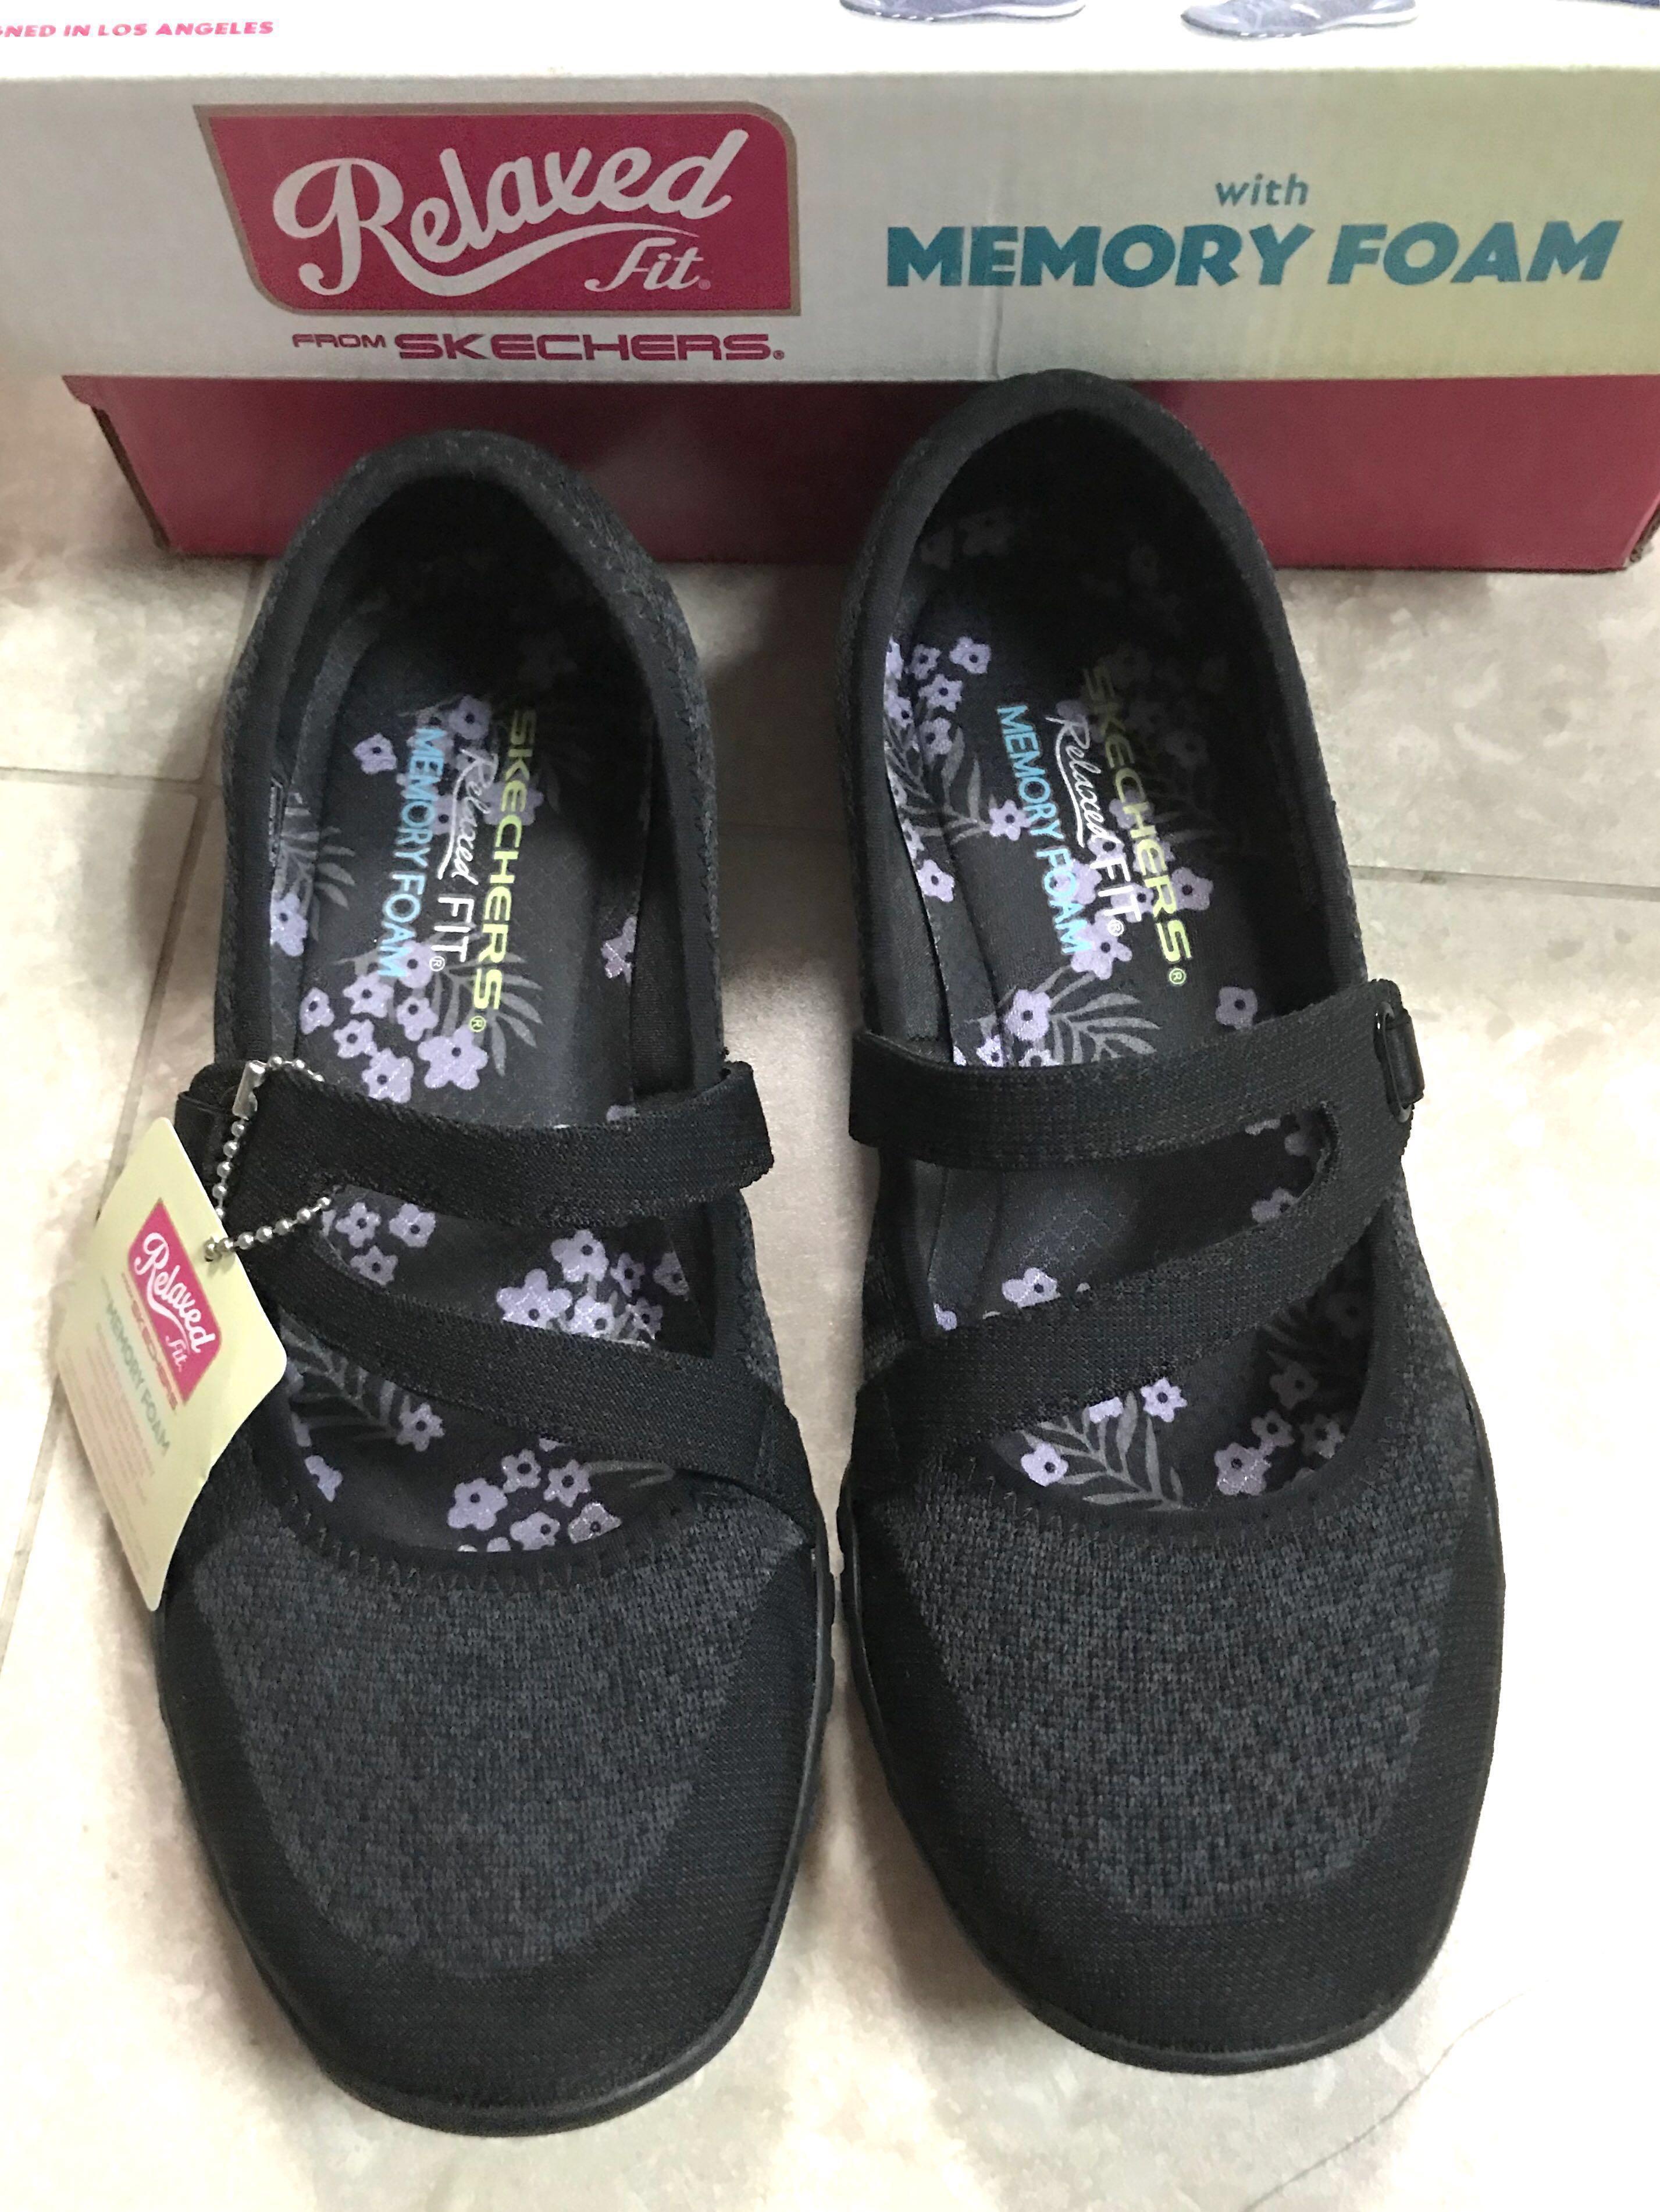 skechers shoes for ladies price